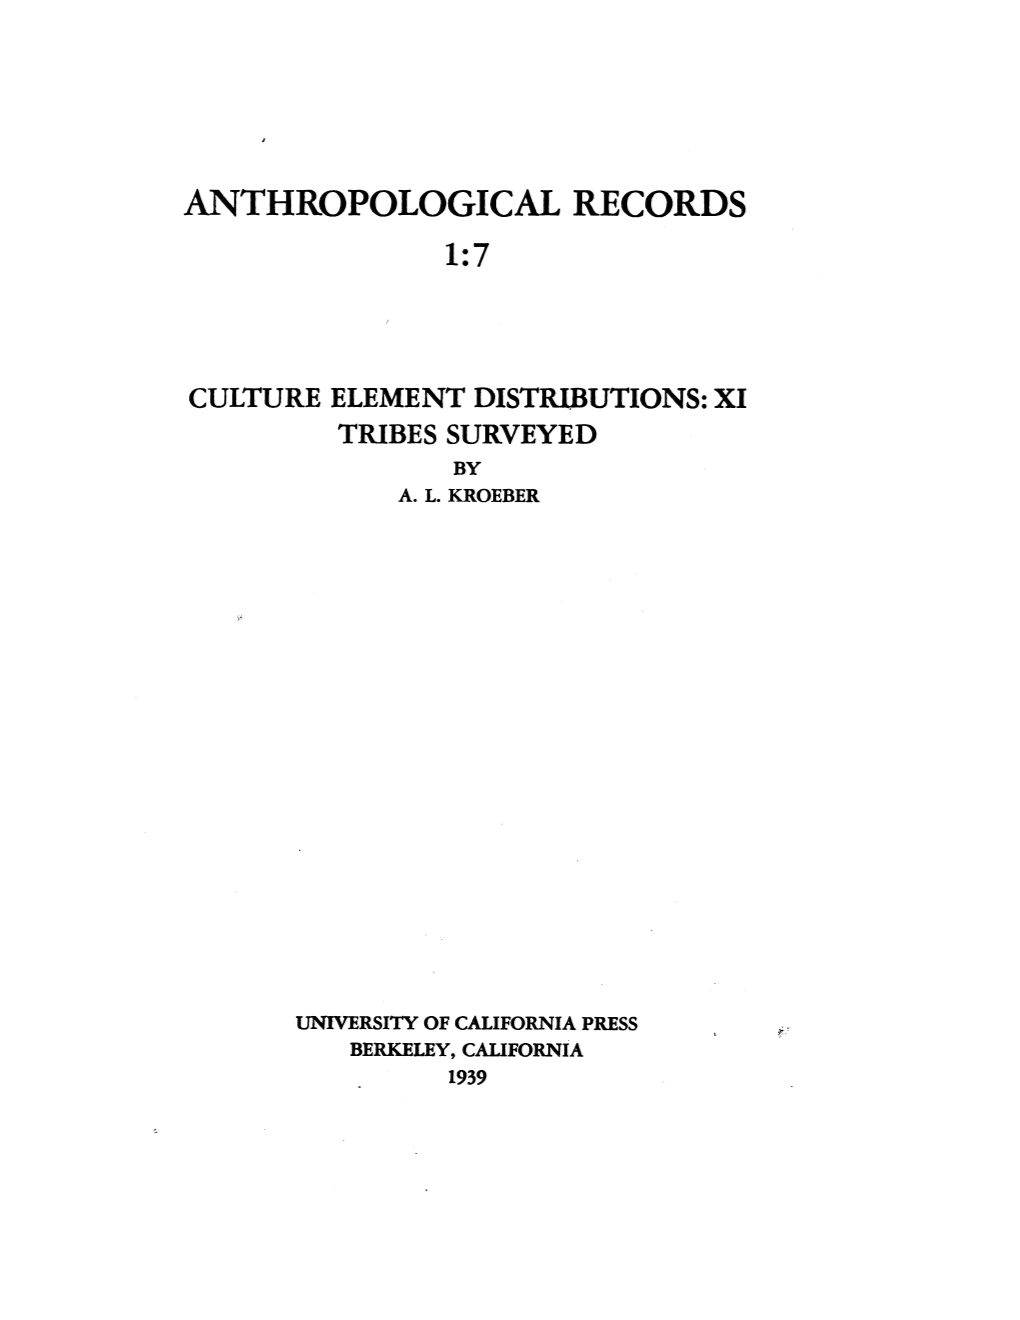 Anthropological Records 1:7